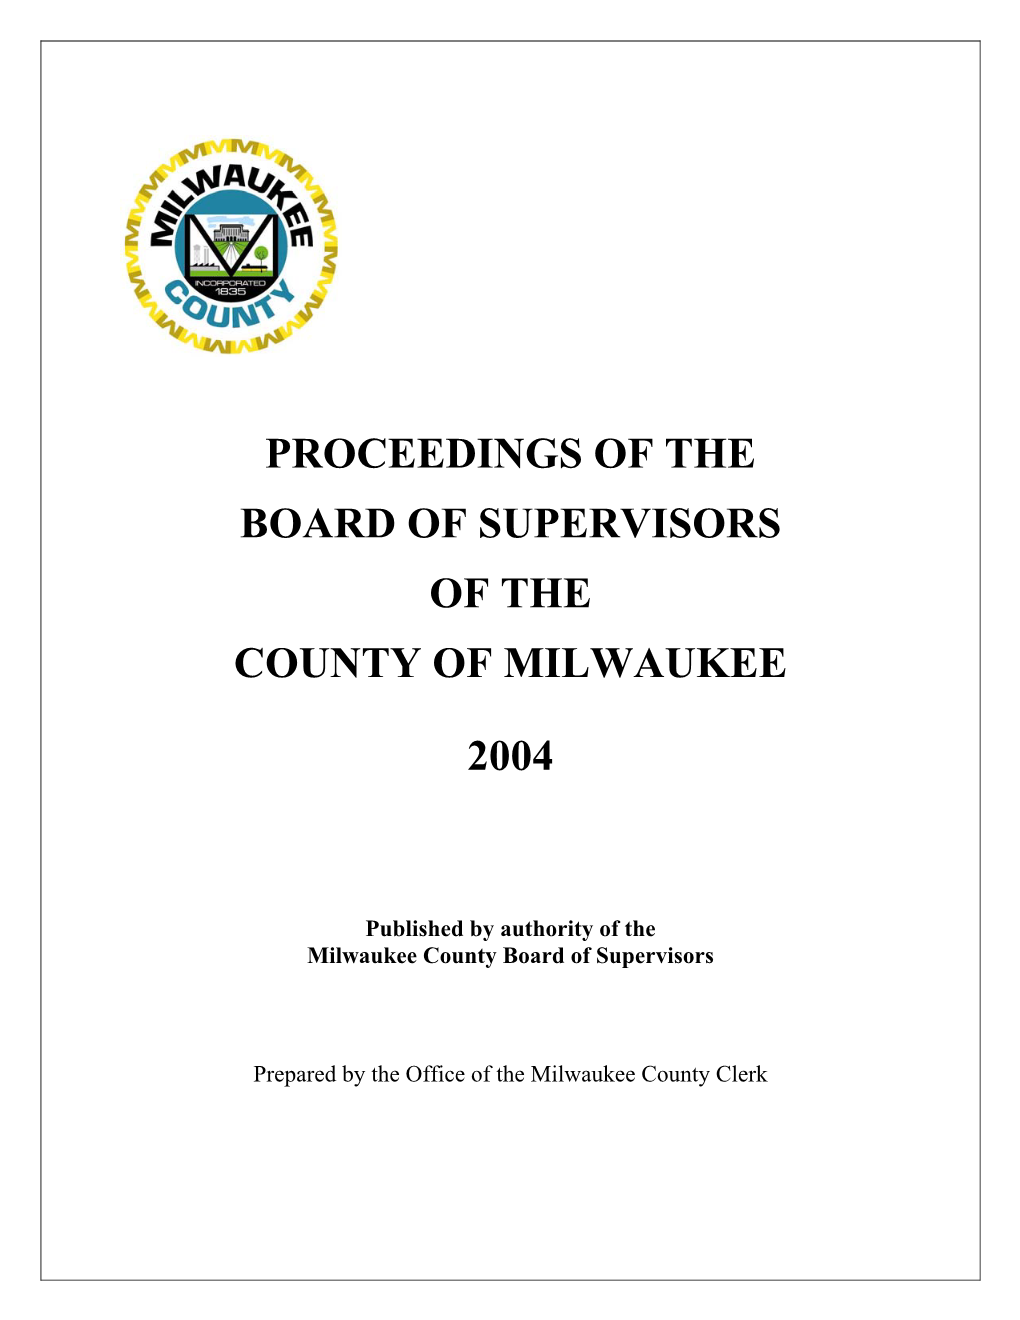 Proceedings of the Board of Supervisors of the County of Milwaukee